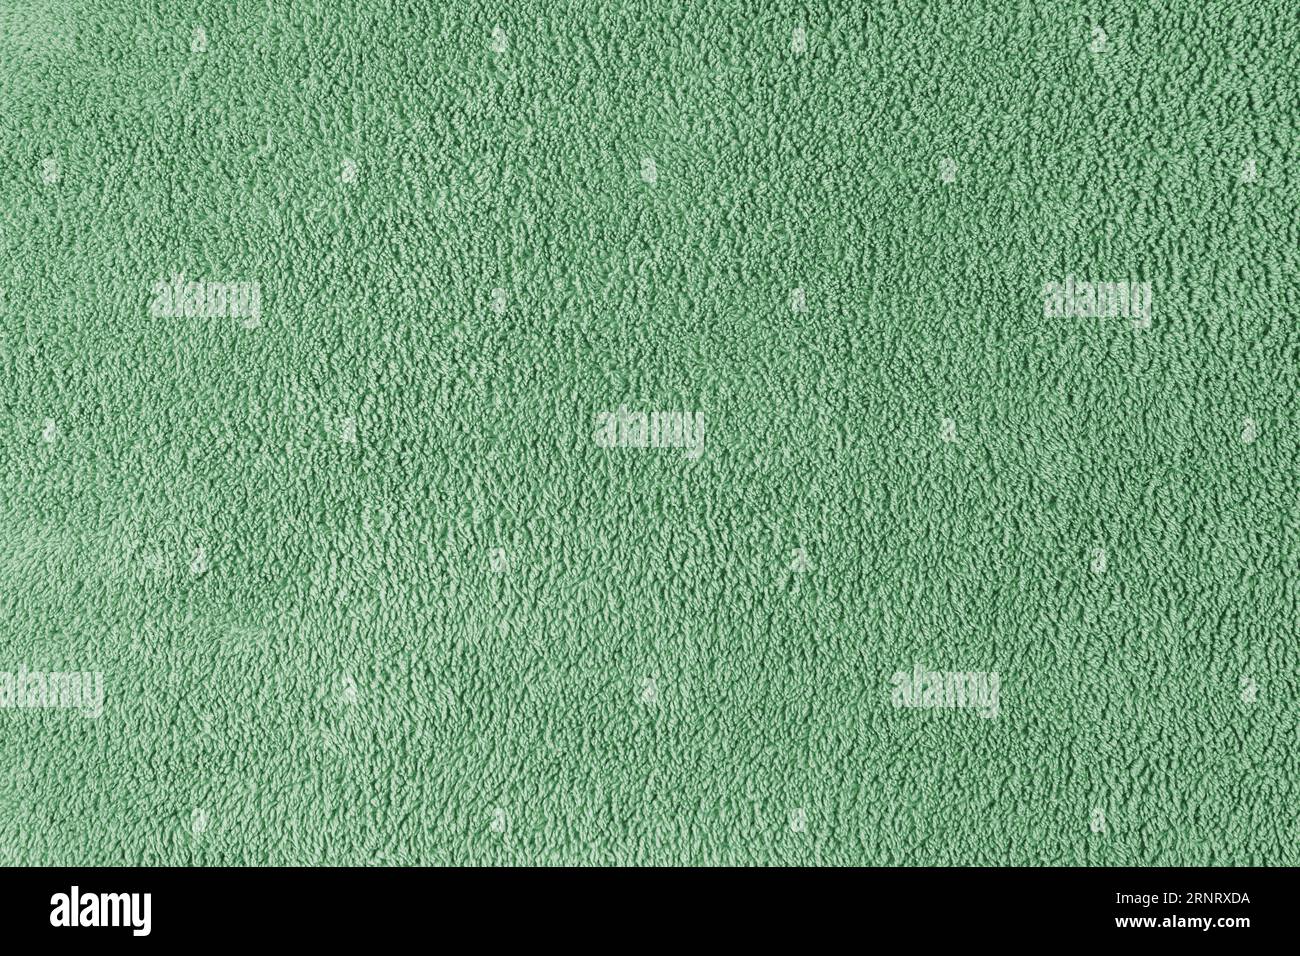 Terry cloth, green towel texture background. Soft fluffy textile bath or beach towel material. Top view, close up. Stock Photo